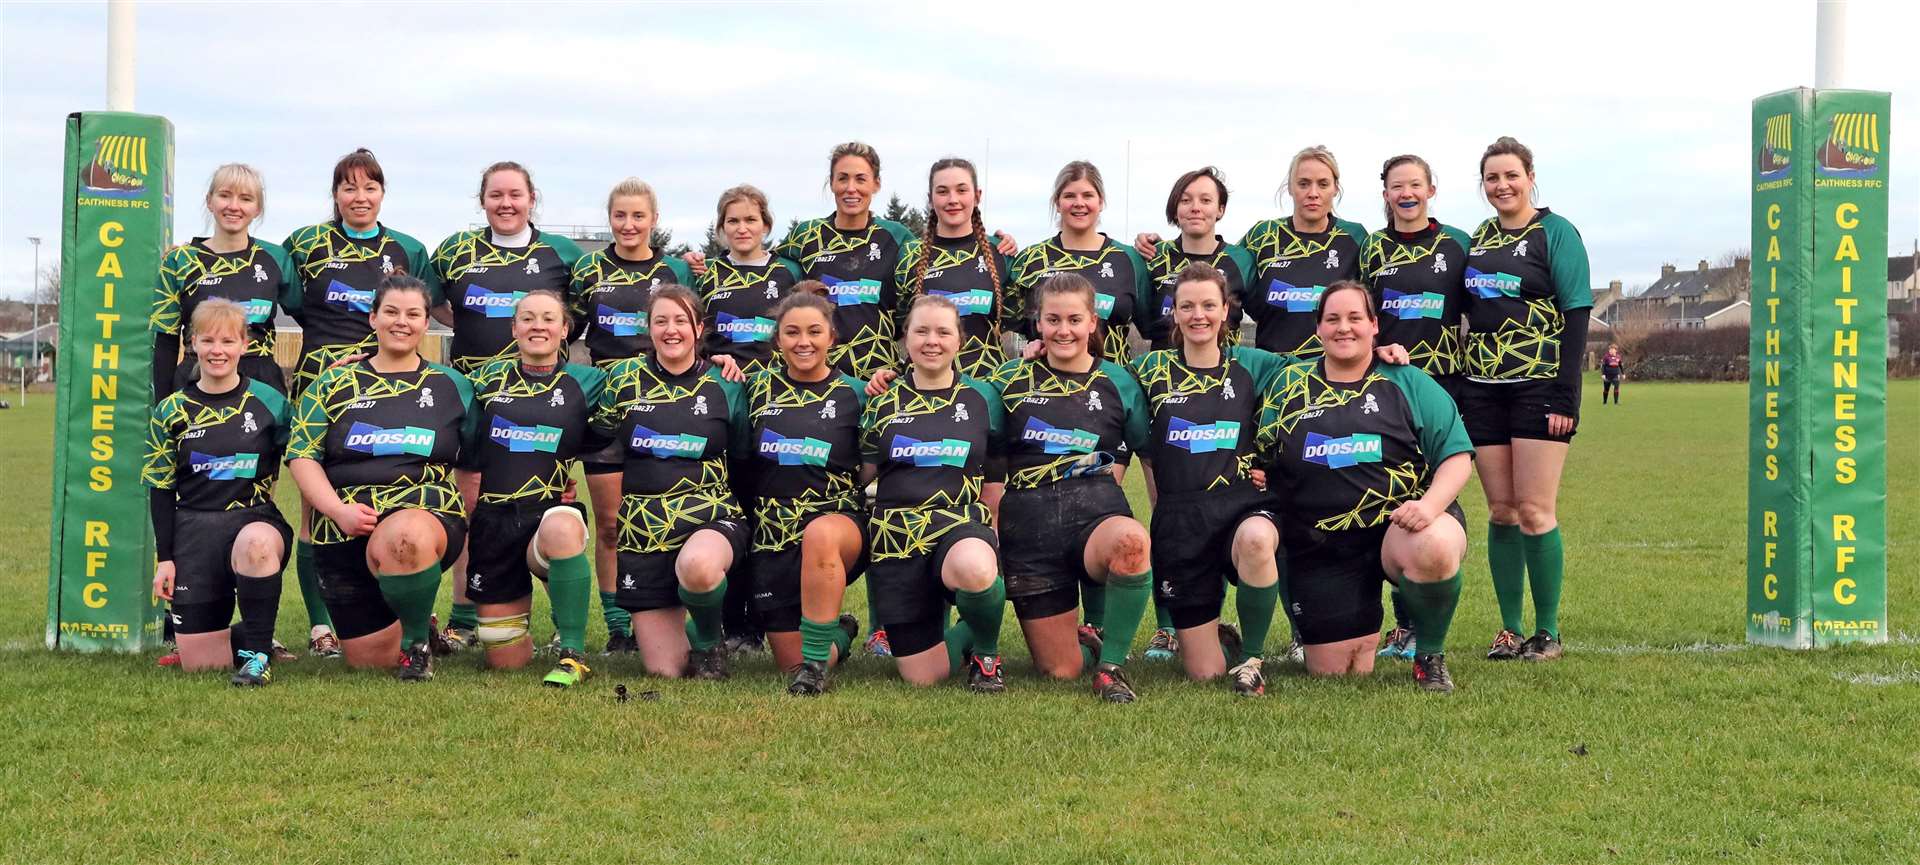 The Caithness Krakens who defeated Stornoway at Millbank in the Women's North Region League. Picture: James Gunn